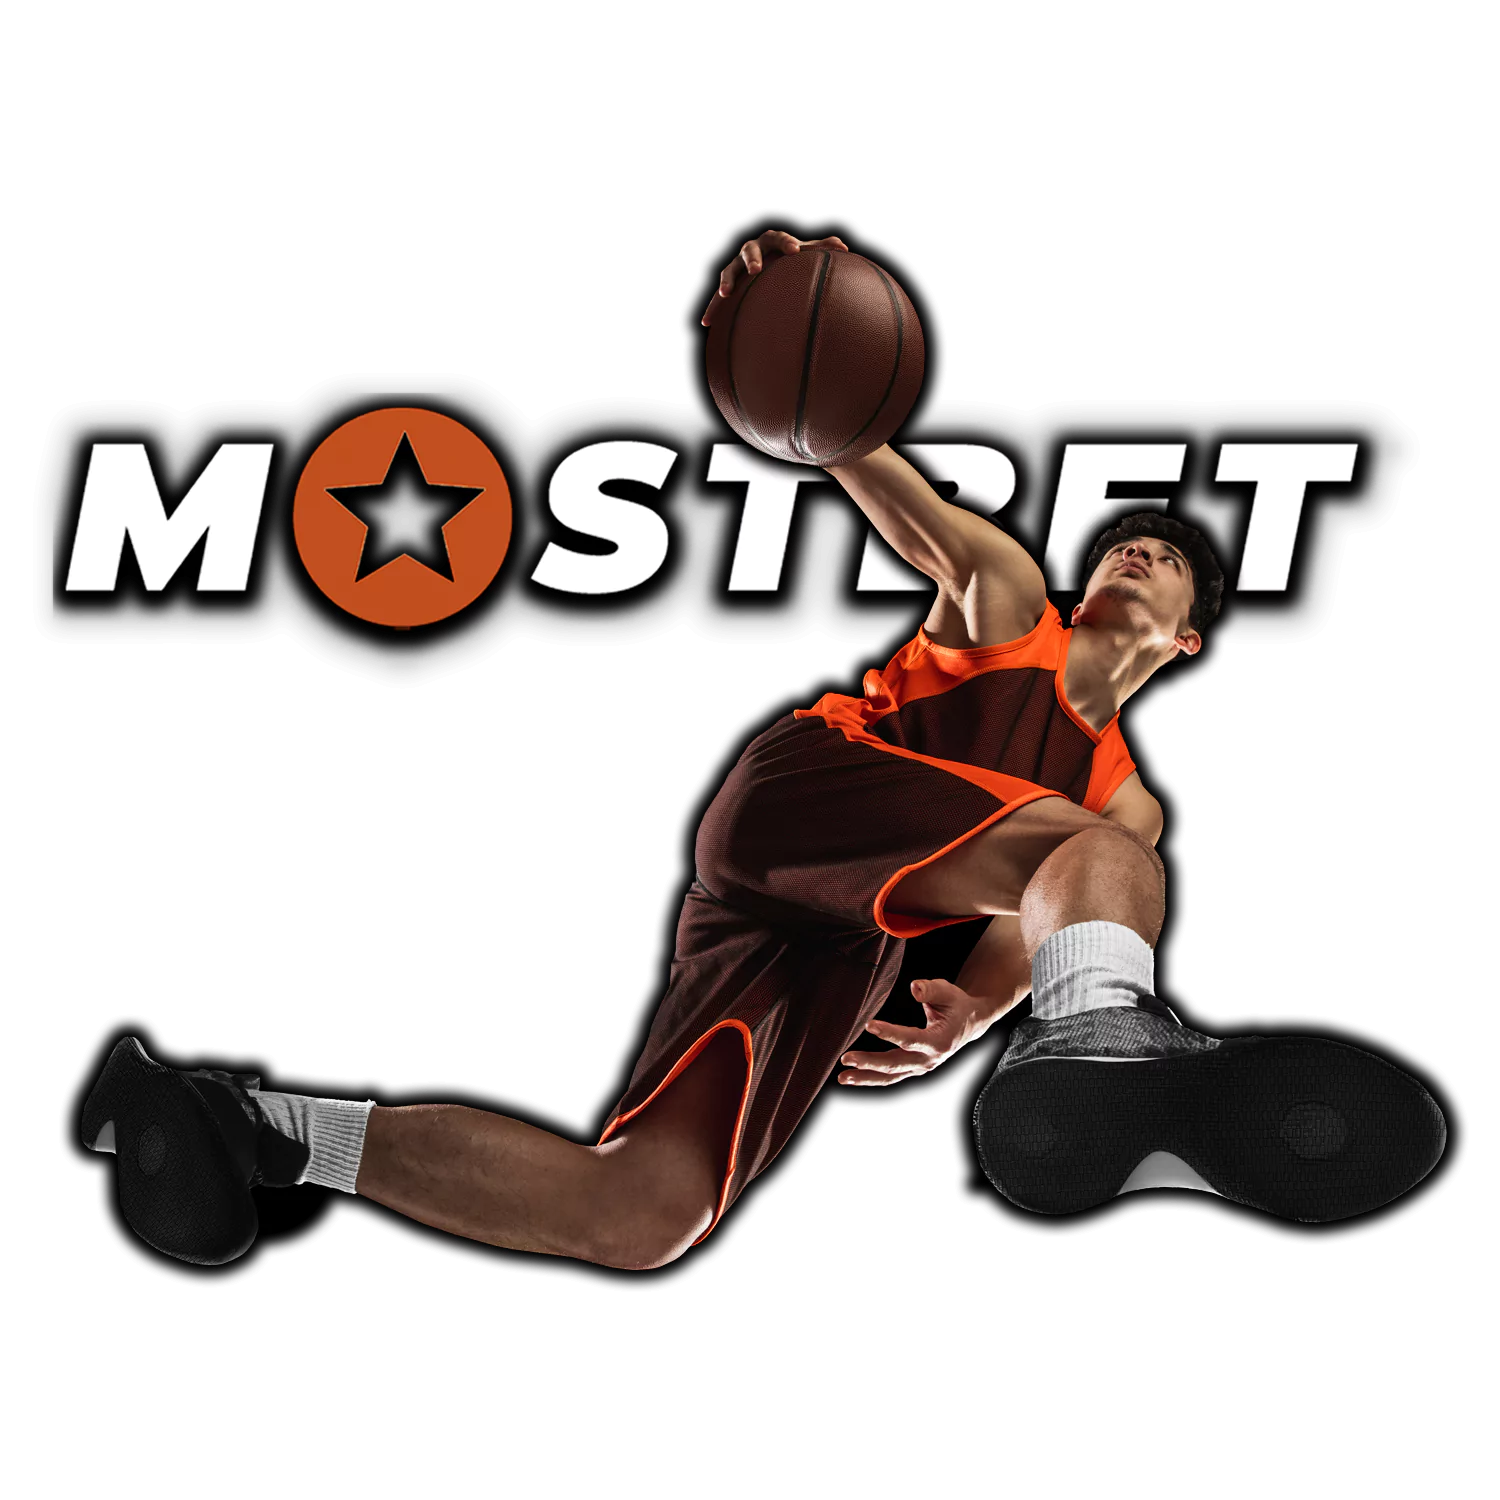 Learn how to place bets on basketball at Mostbet.